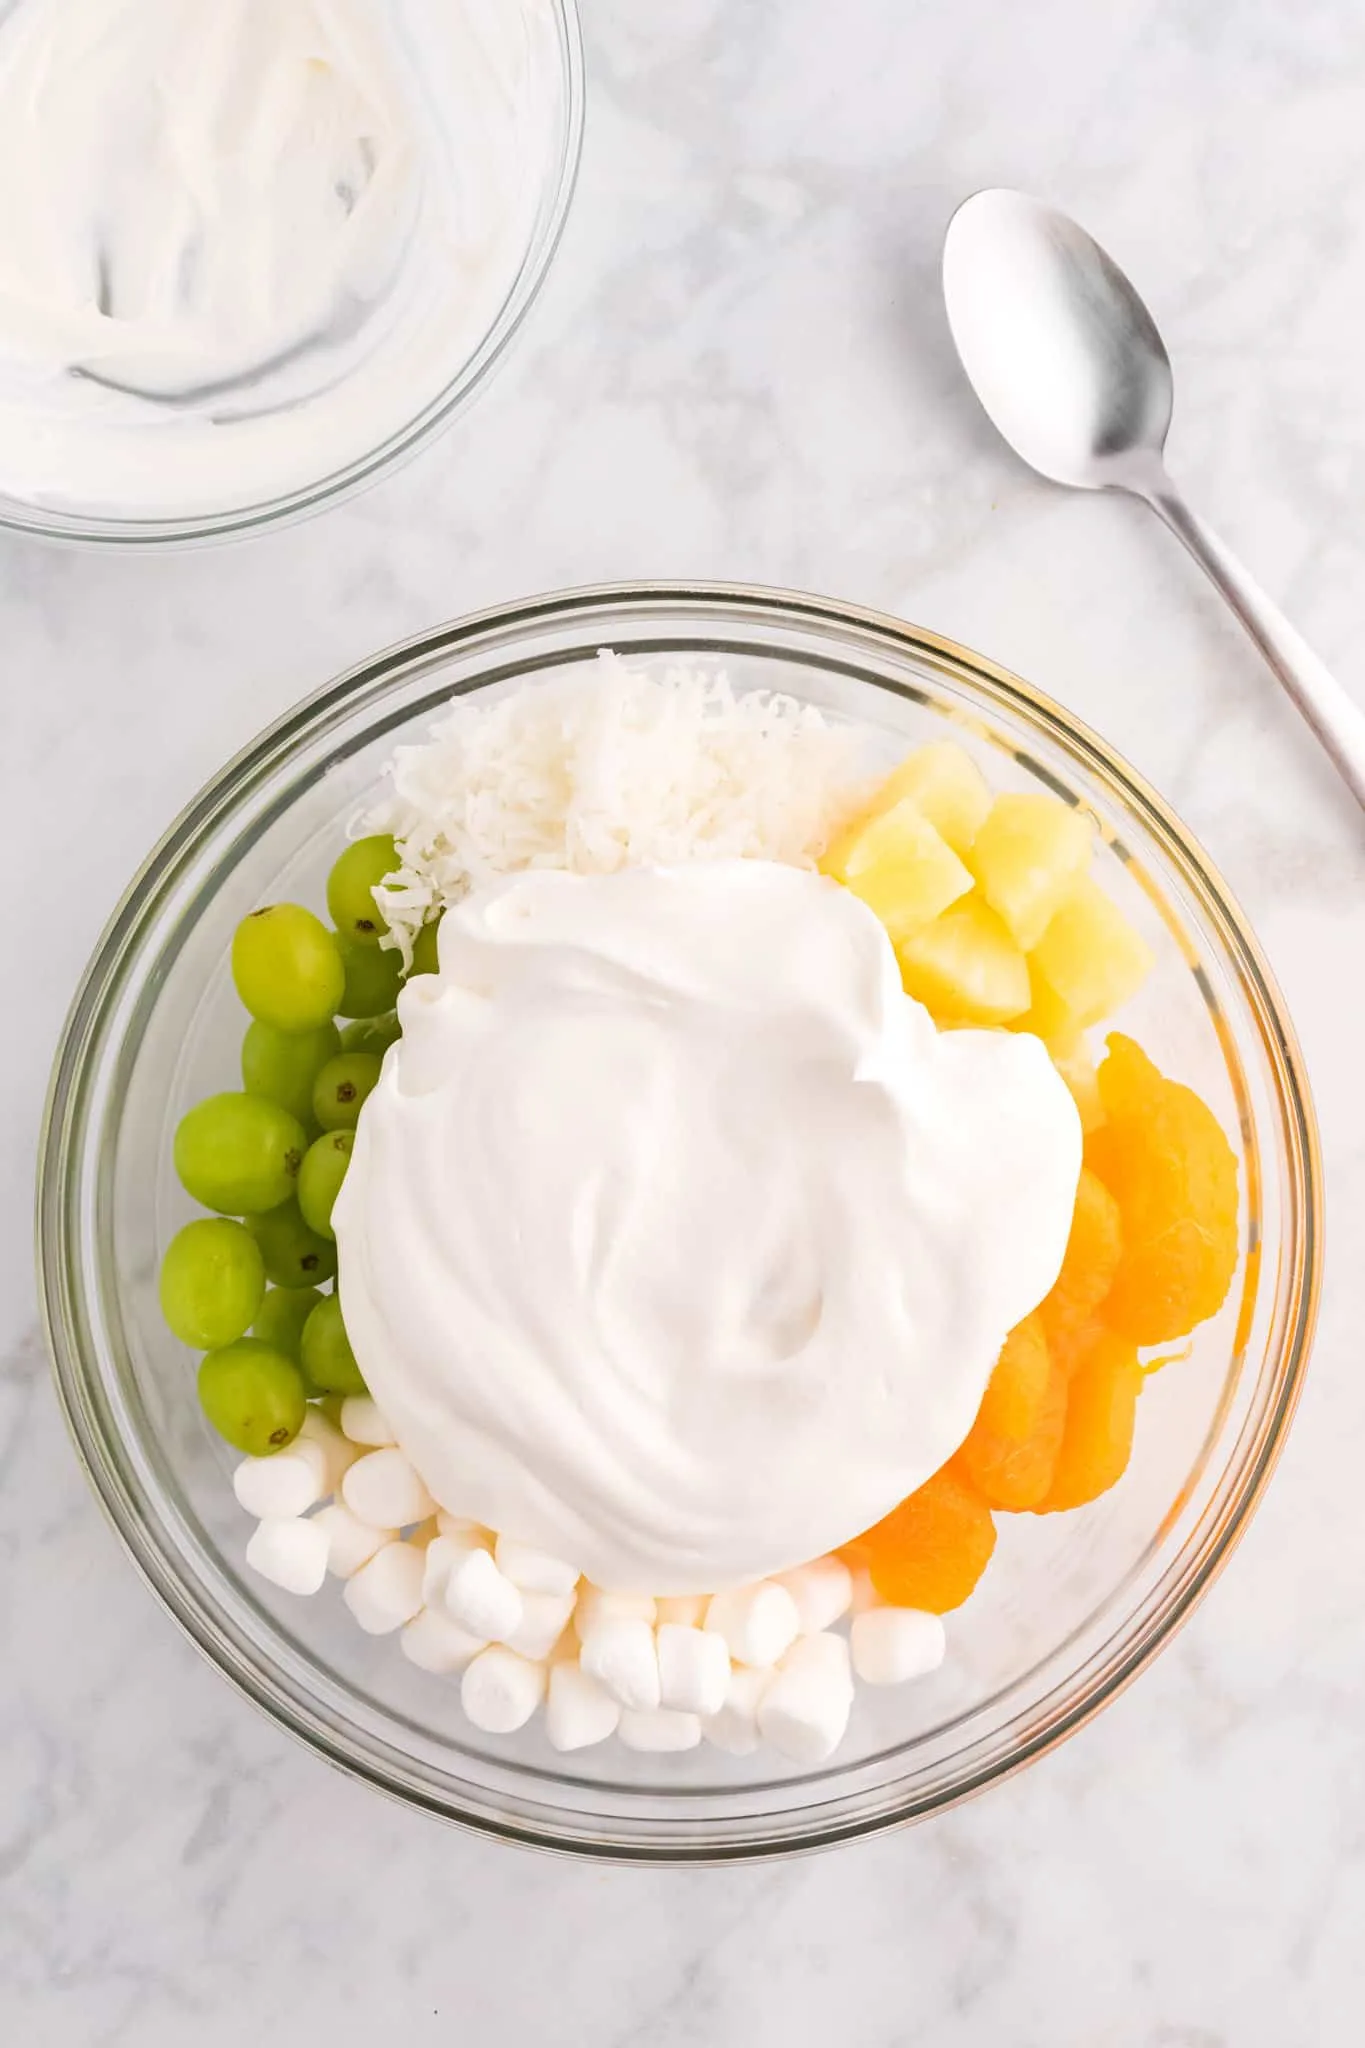 Cool Whip on top of fruit salad ingredients in a bowl